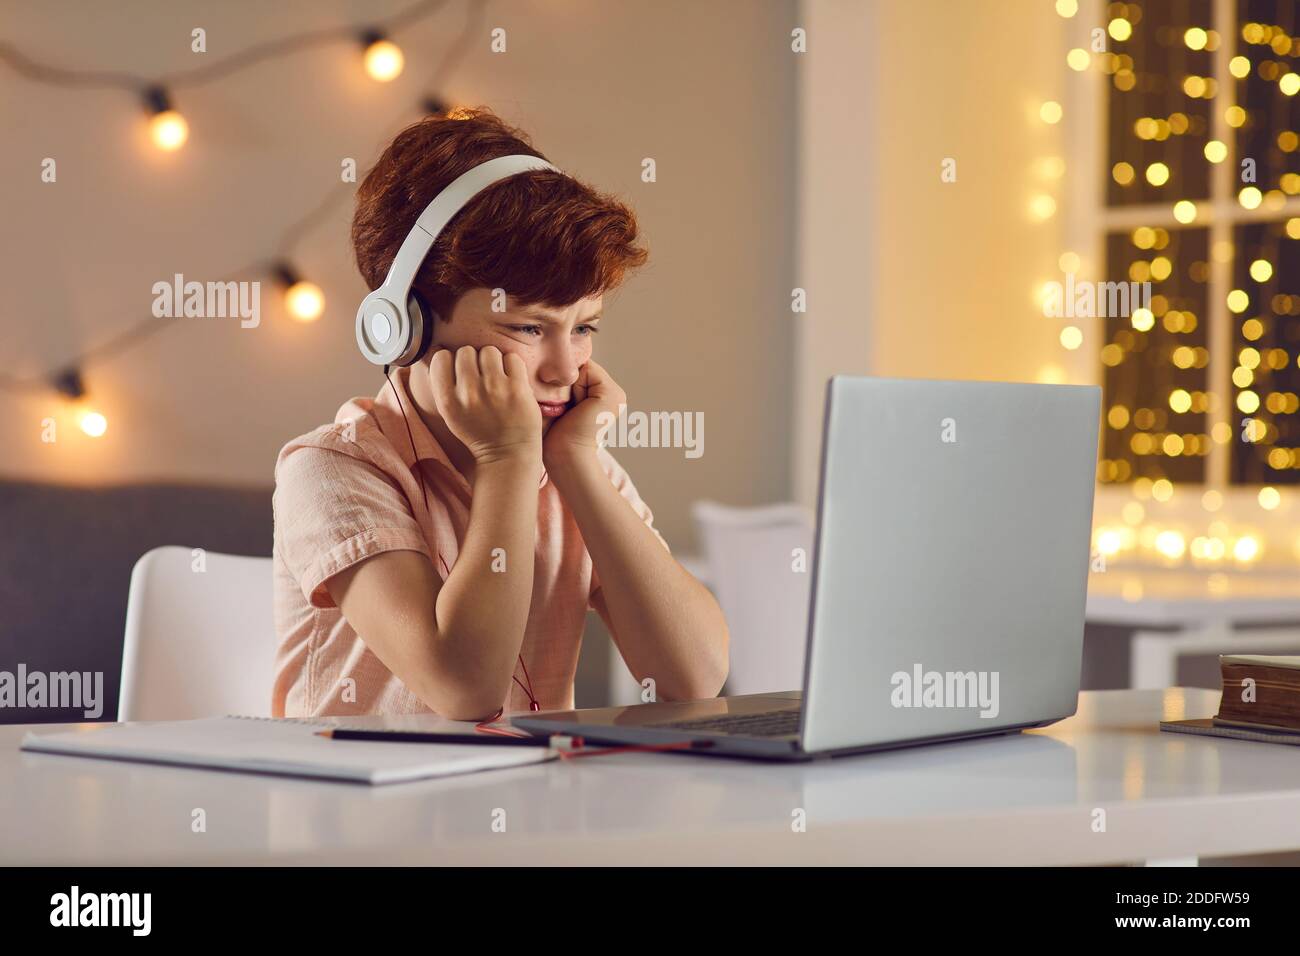 Displeased boy in headphones sitting and watching lesson or course online on laptop at home Stock Photo